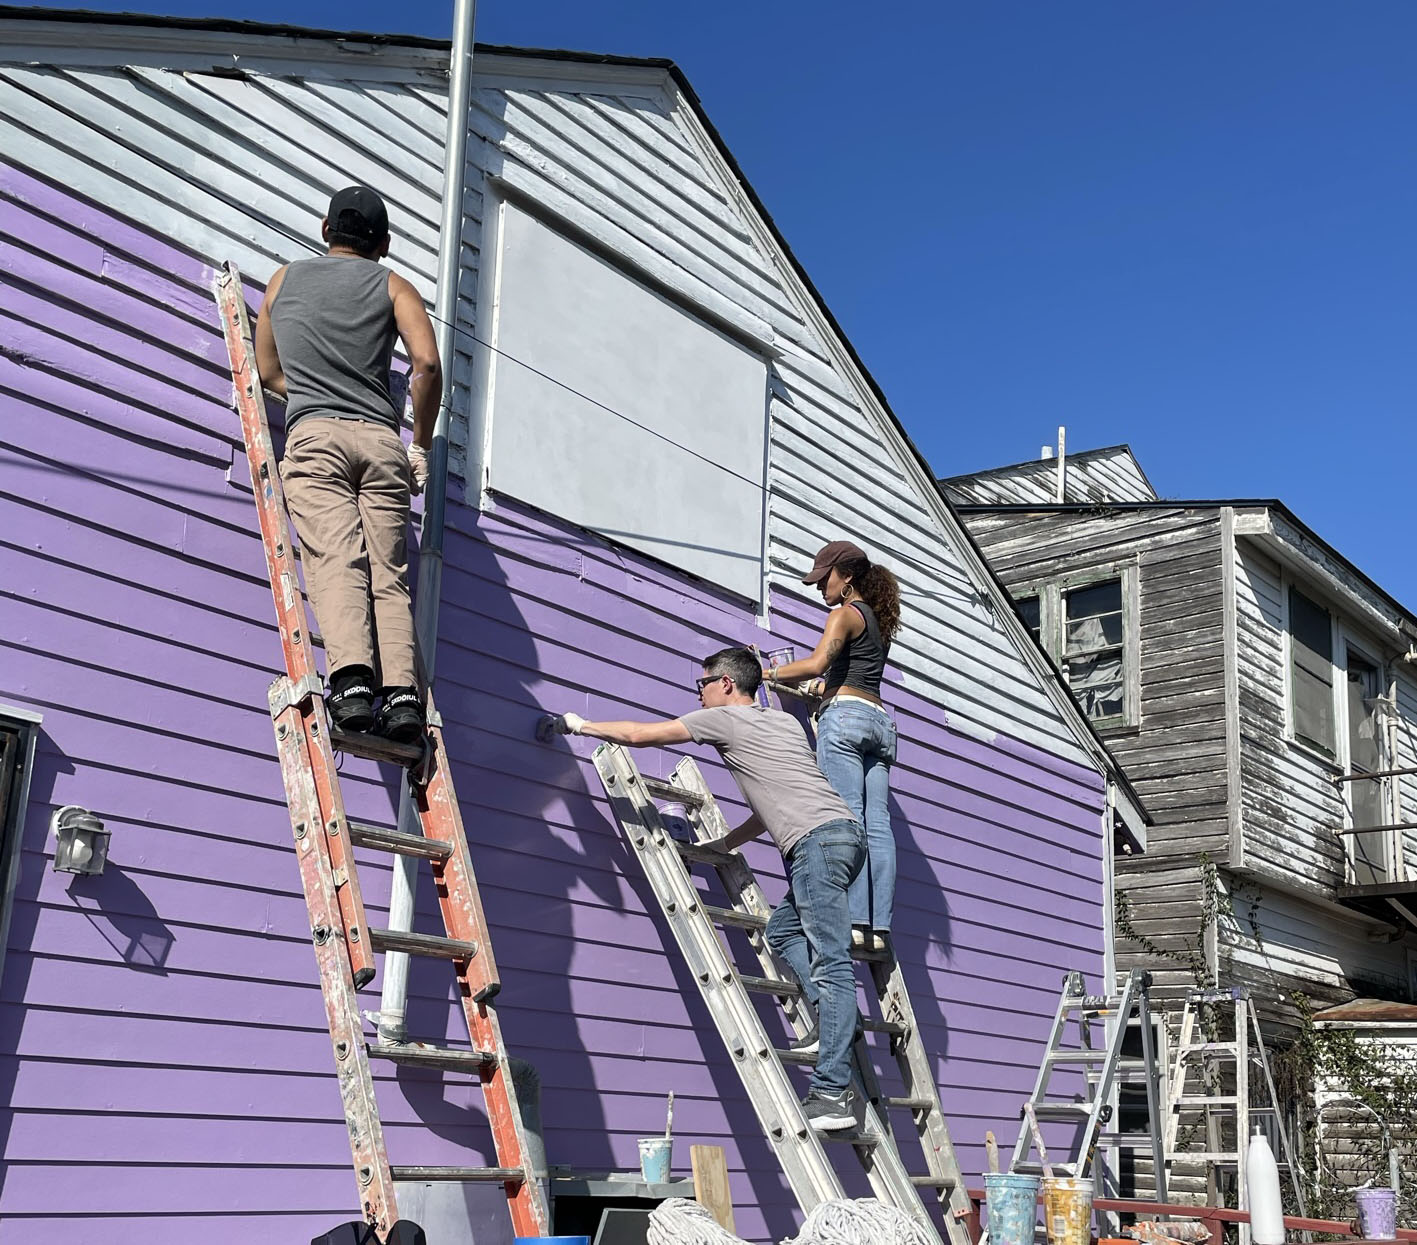 3 students paint a purple house in New Orleans